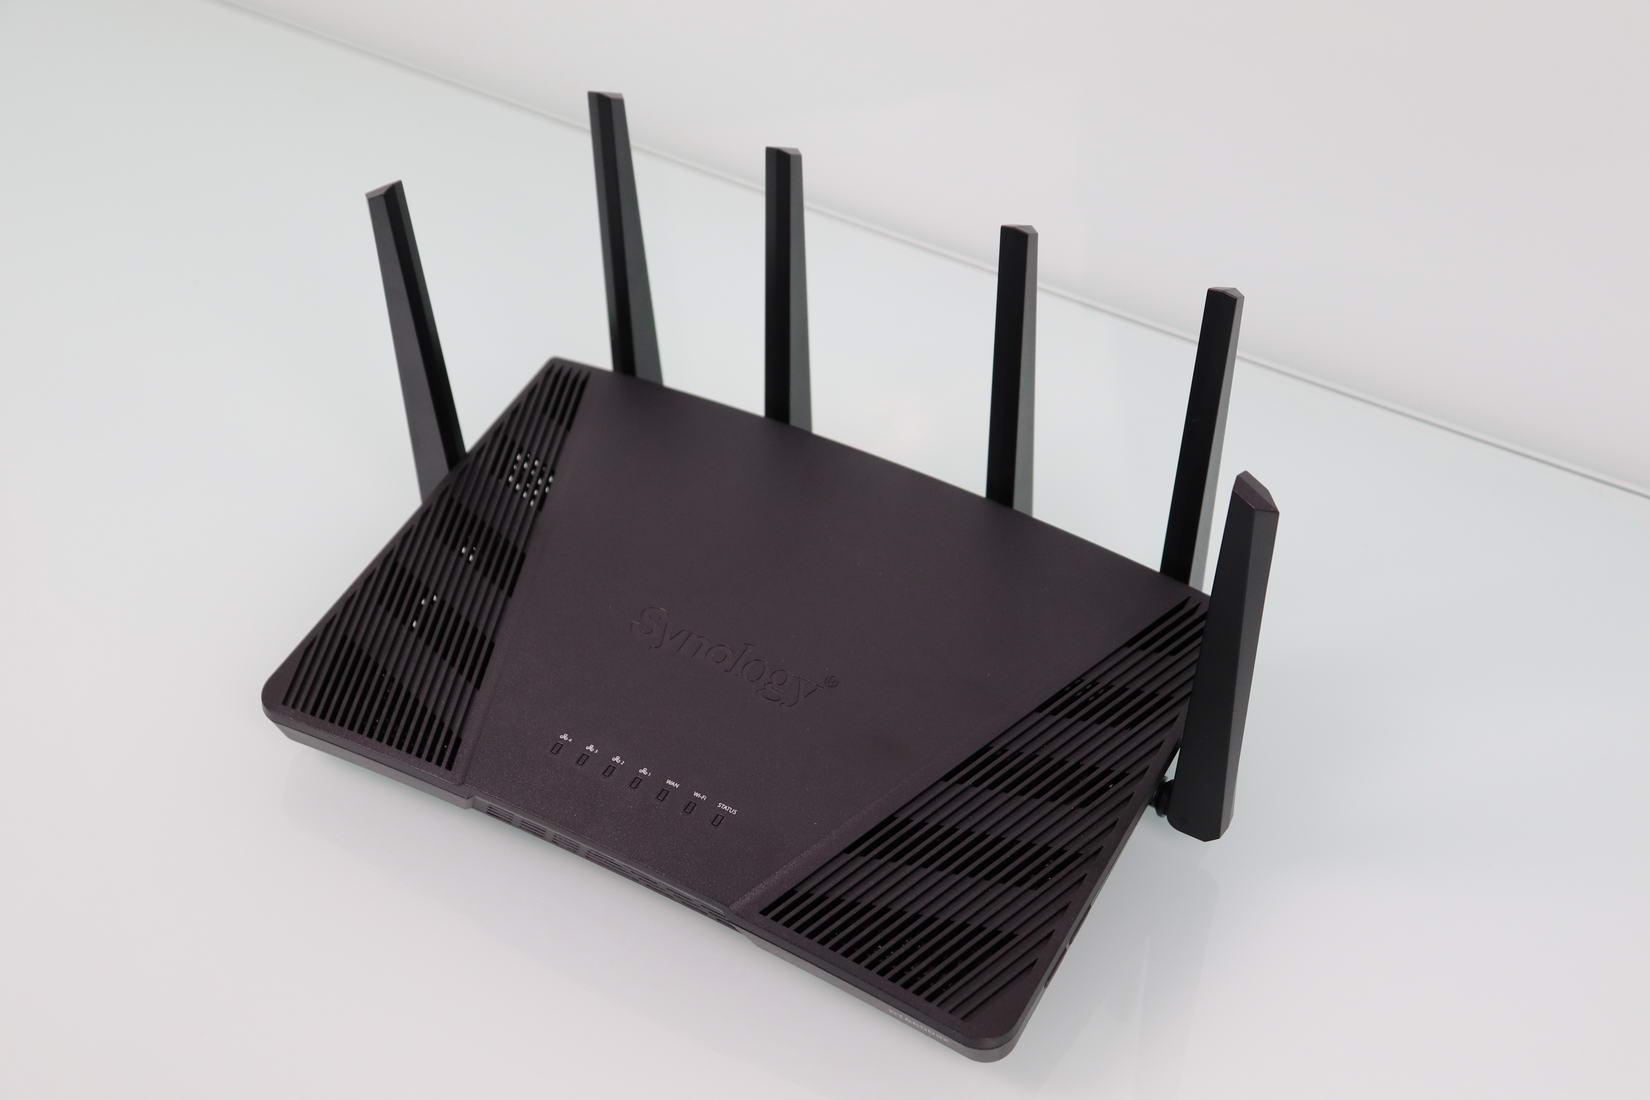 WiFi Router 6 Synology RT6600ax in all its glory